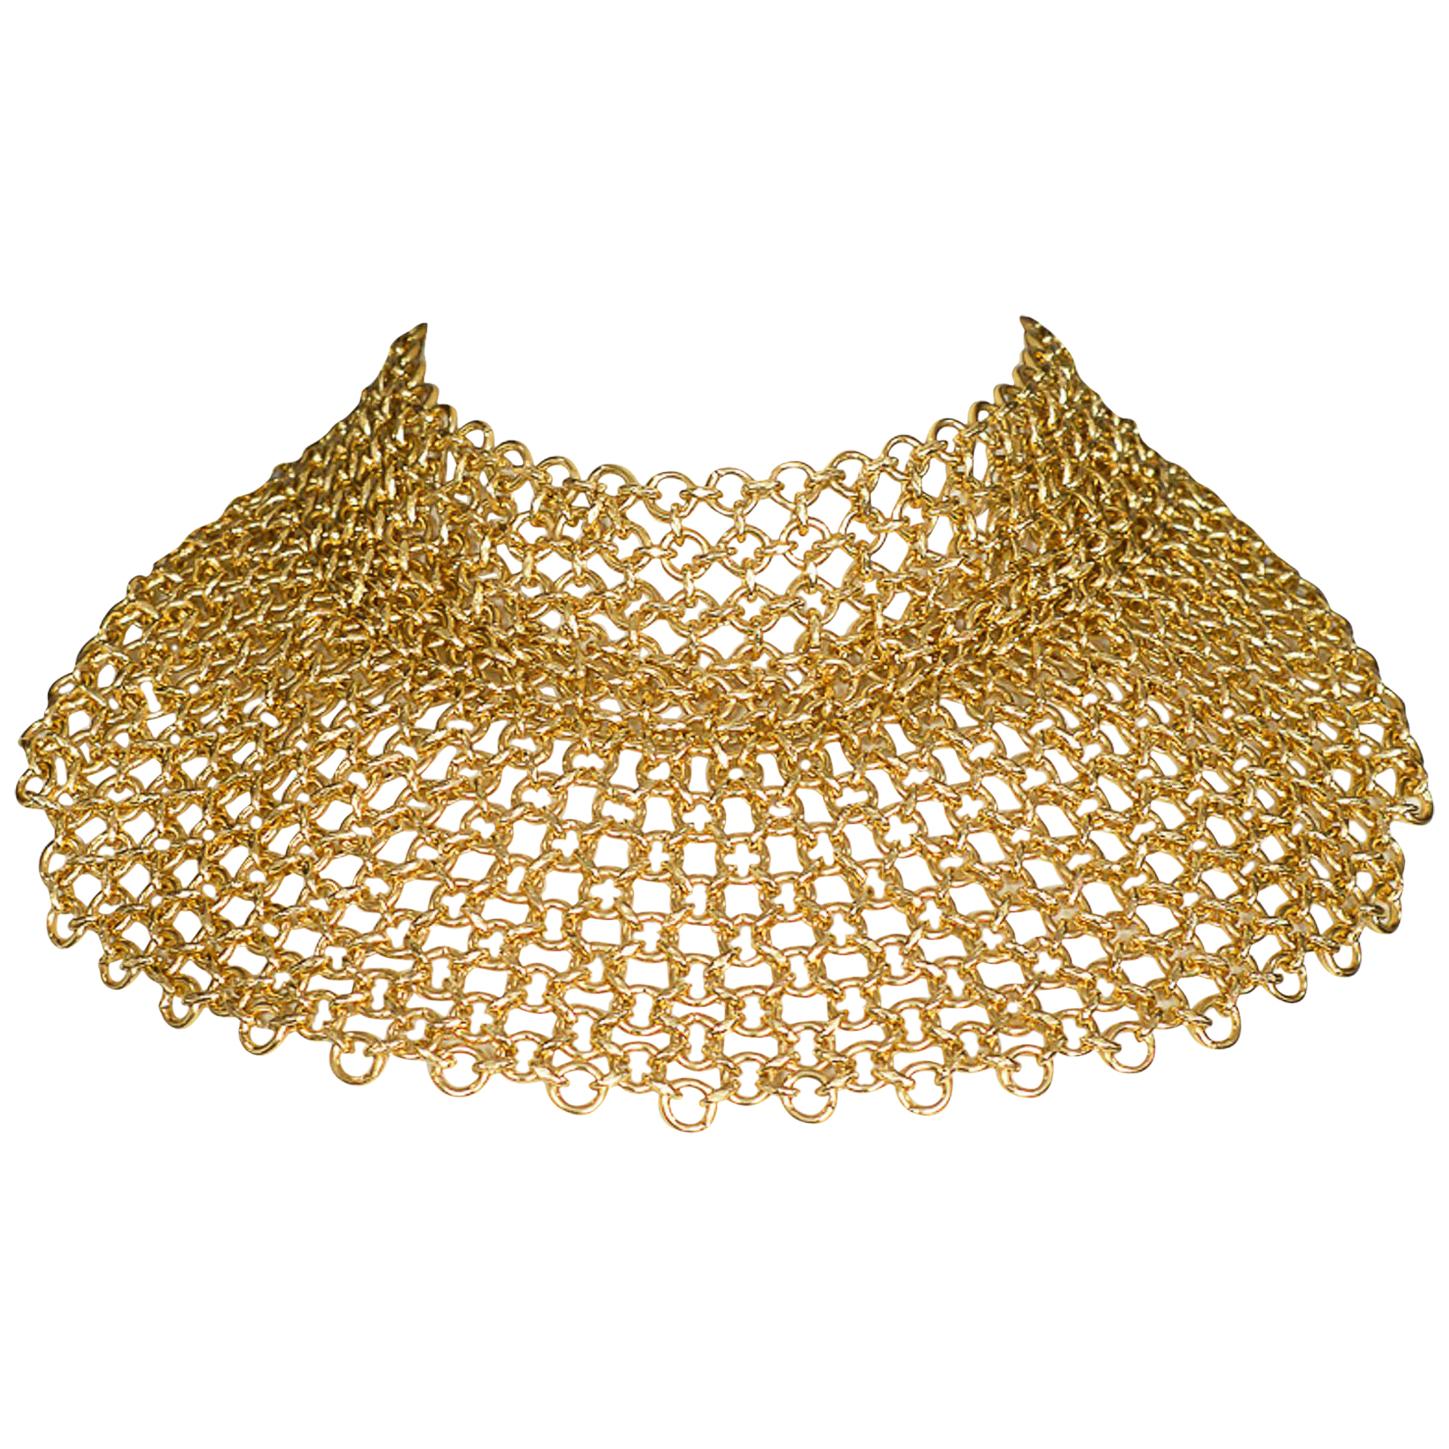 Vintage Gianni Versace 1990's Gold Chainmail Choker